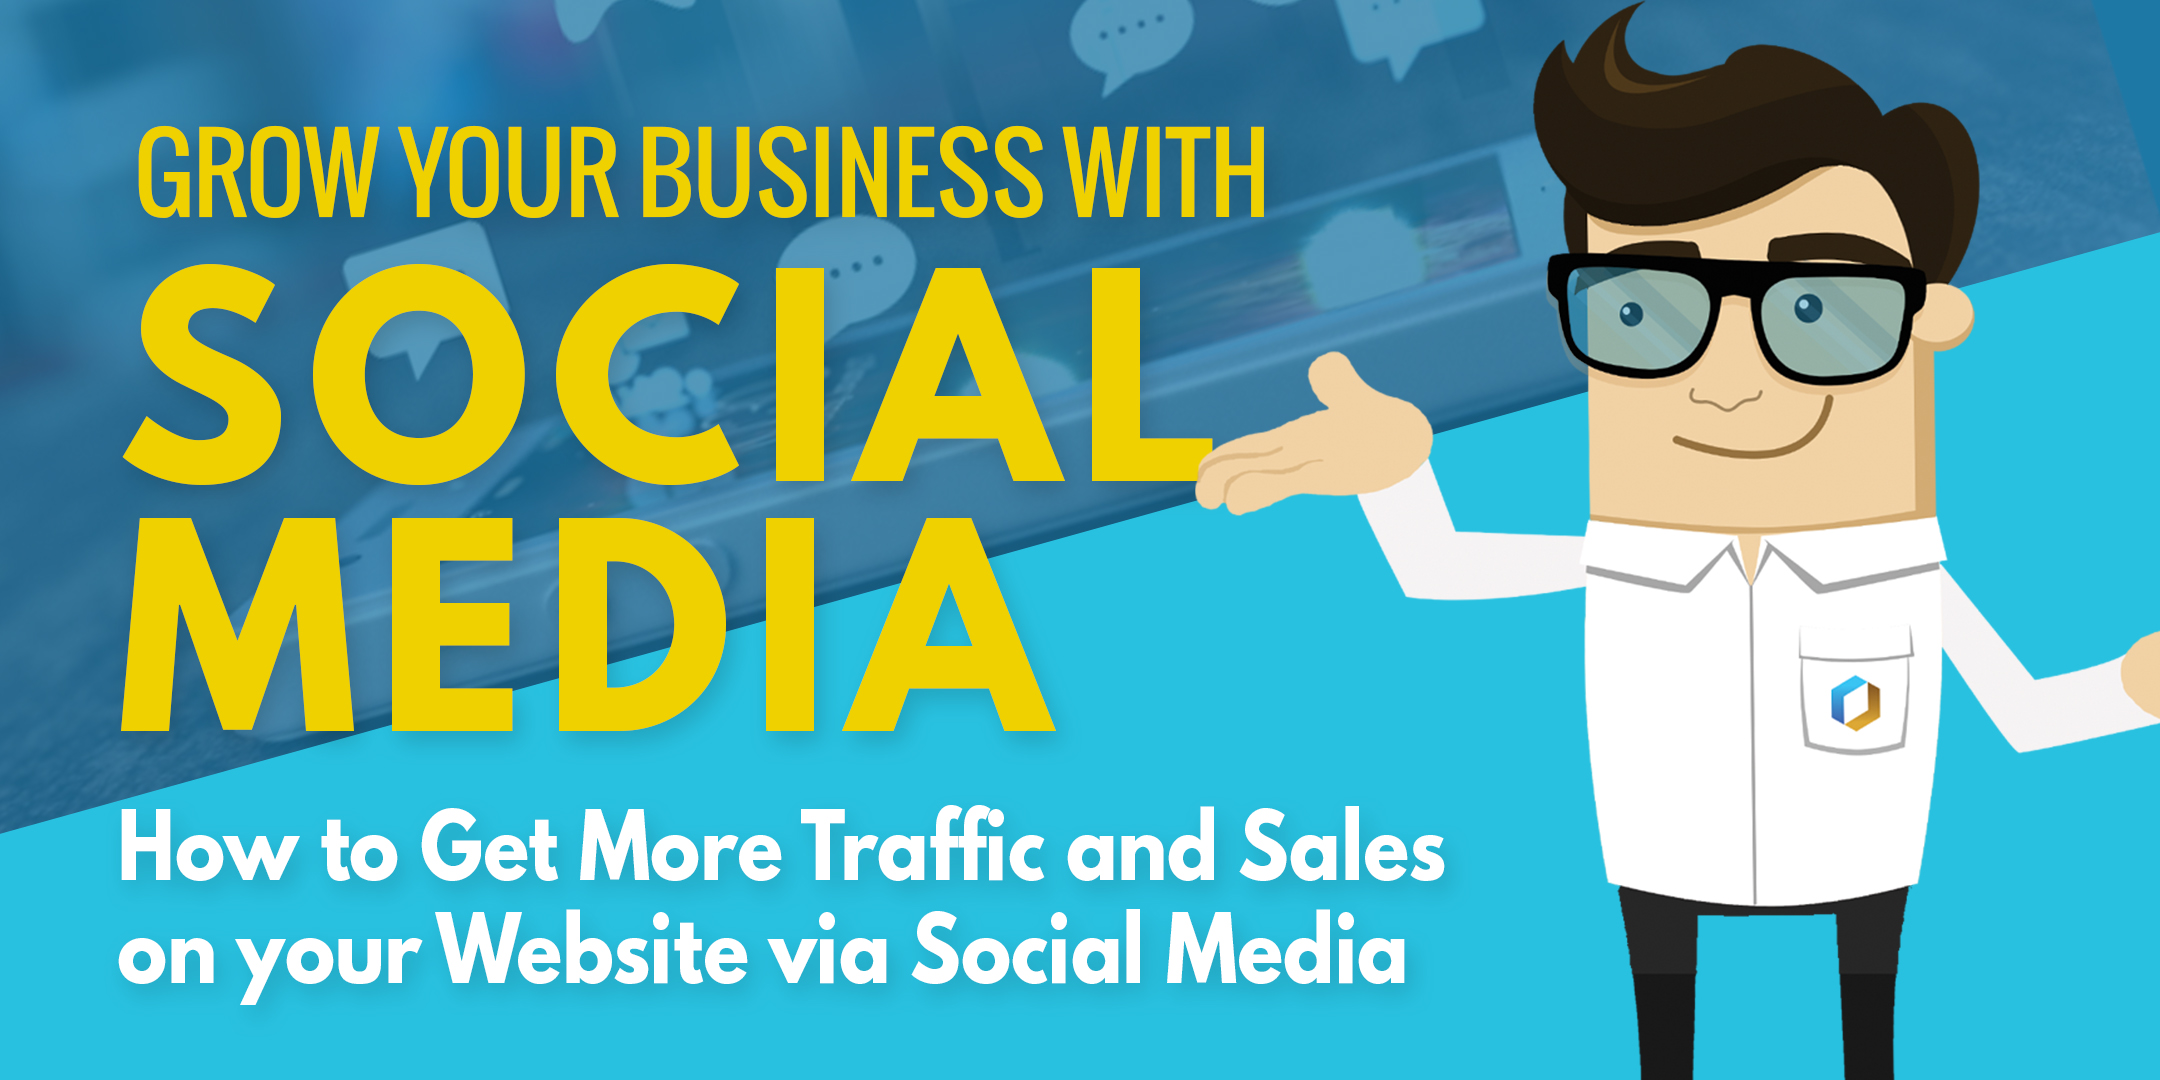 How to Increase your website traffic and sales using social media